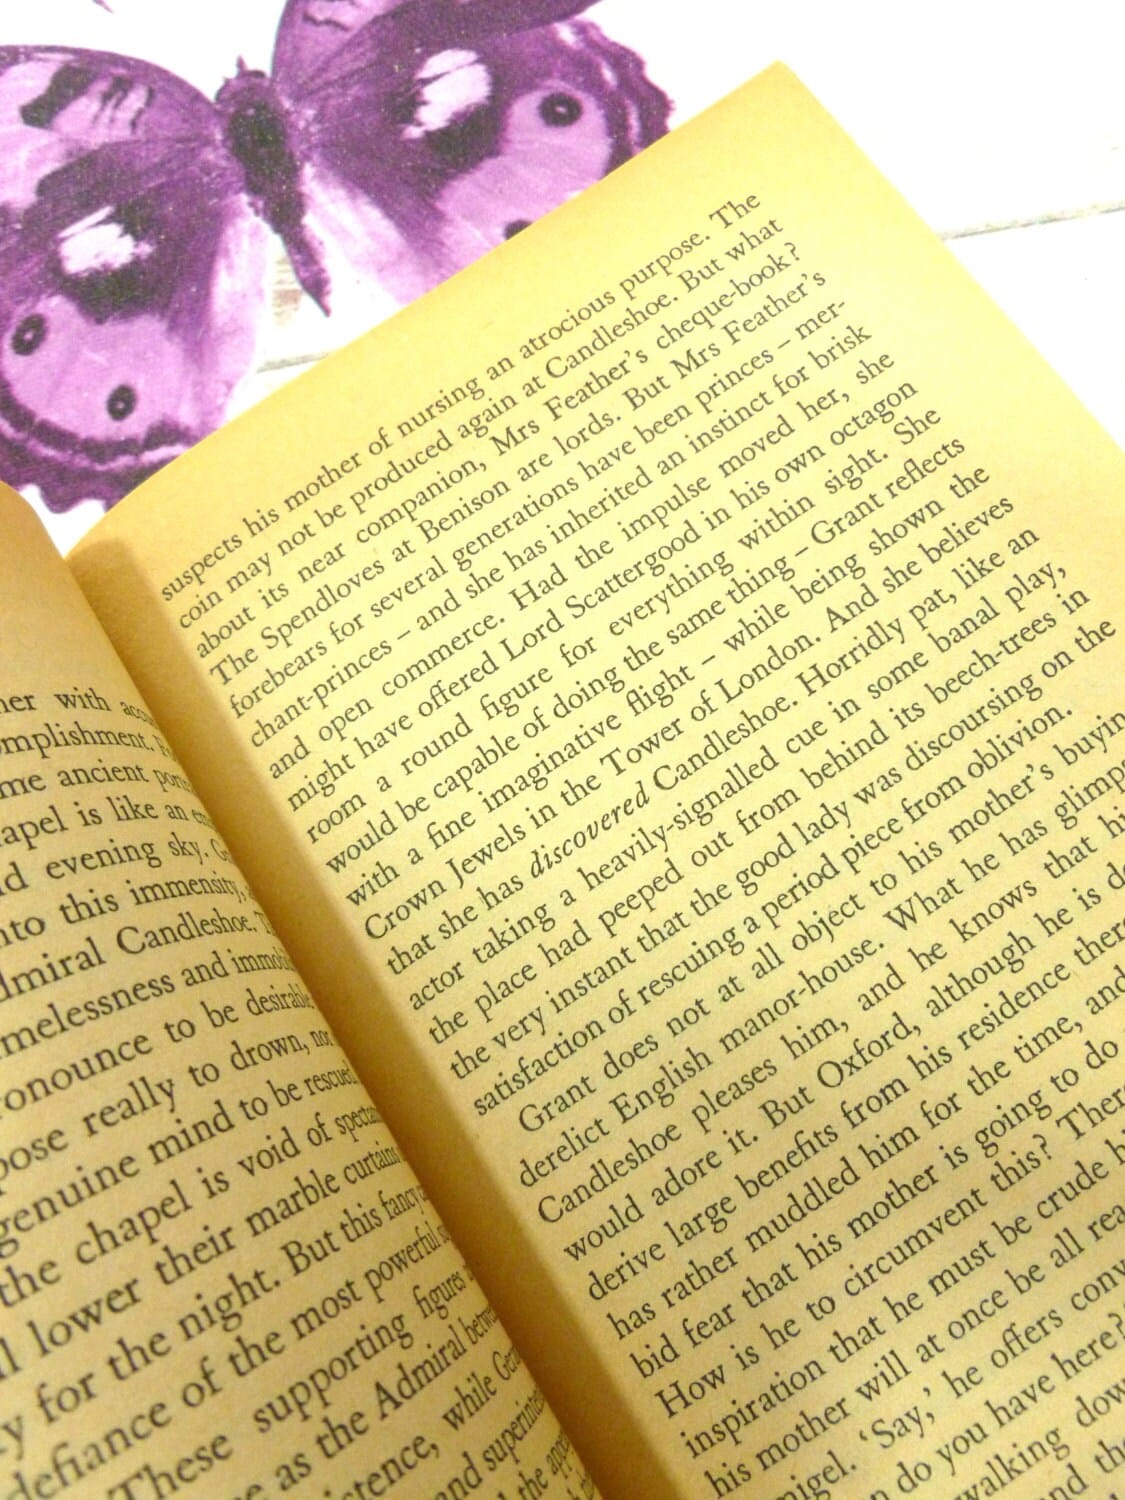 Pages of Vintage Penguin Paperback Christmas at Candleshoe by Michael Innes First Edition showing text.